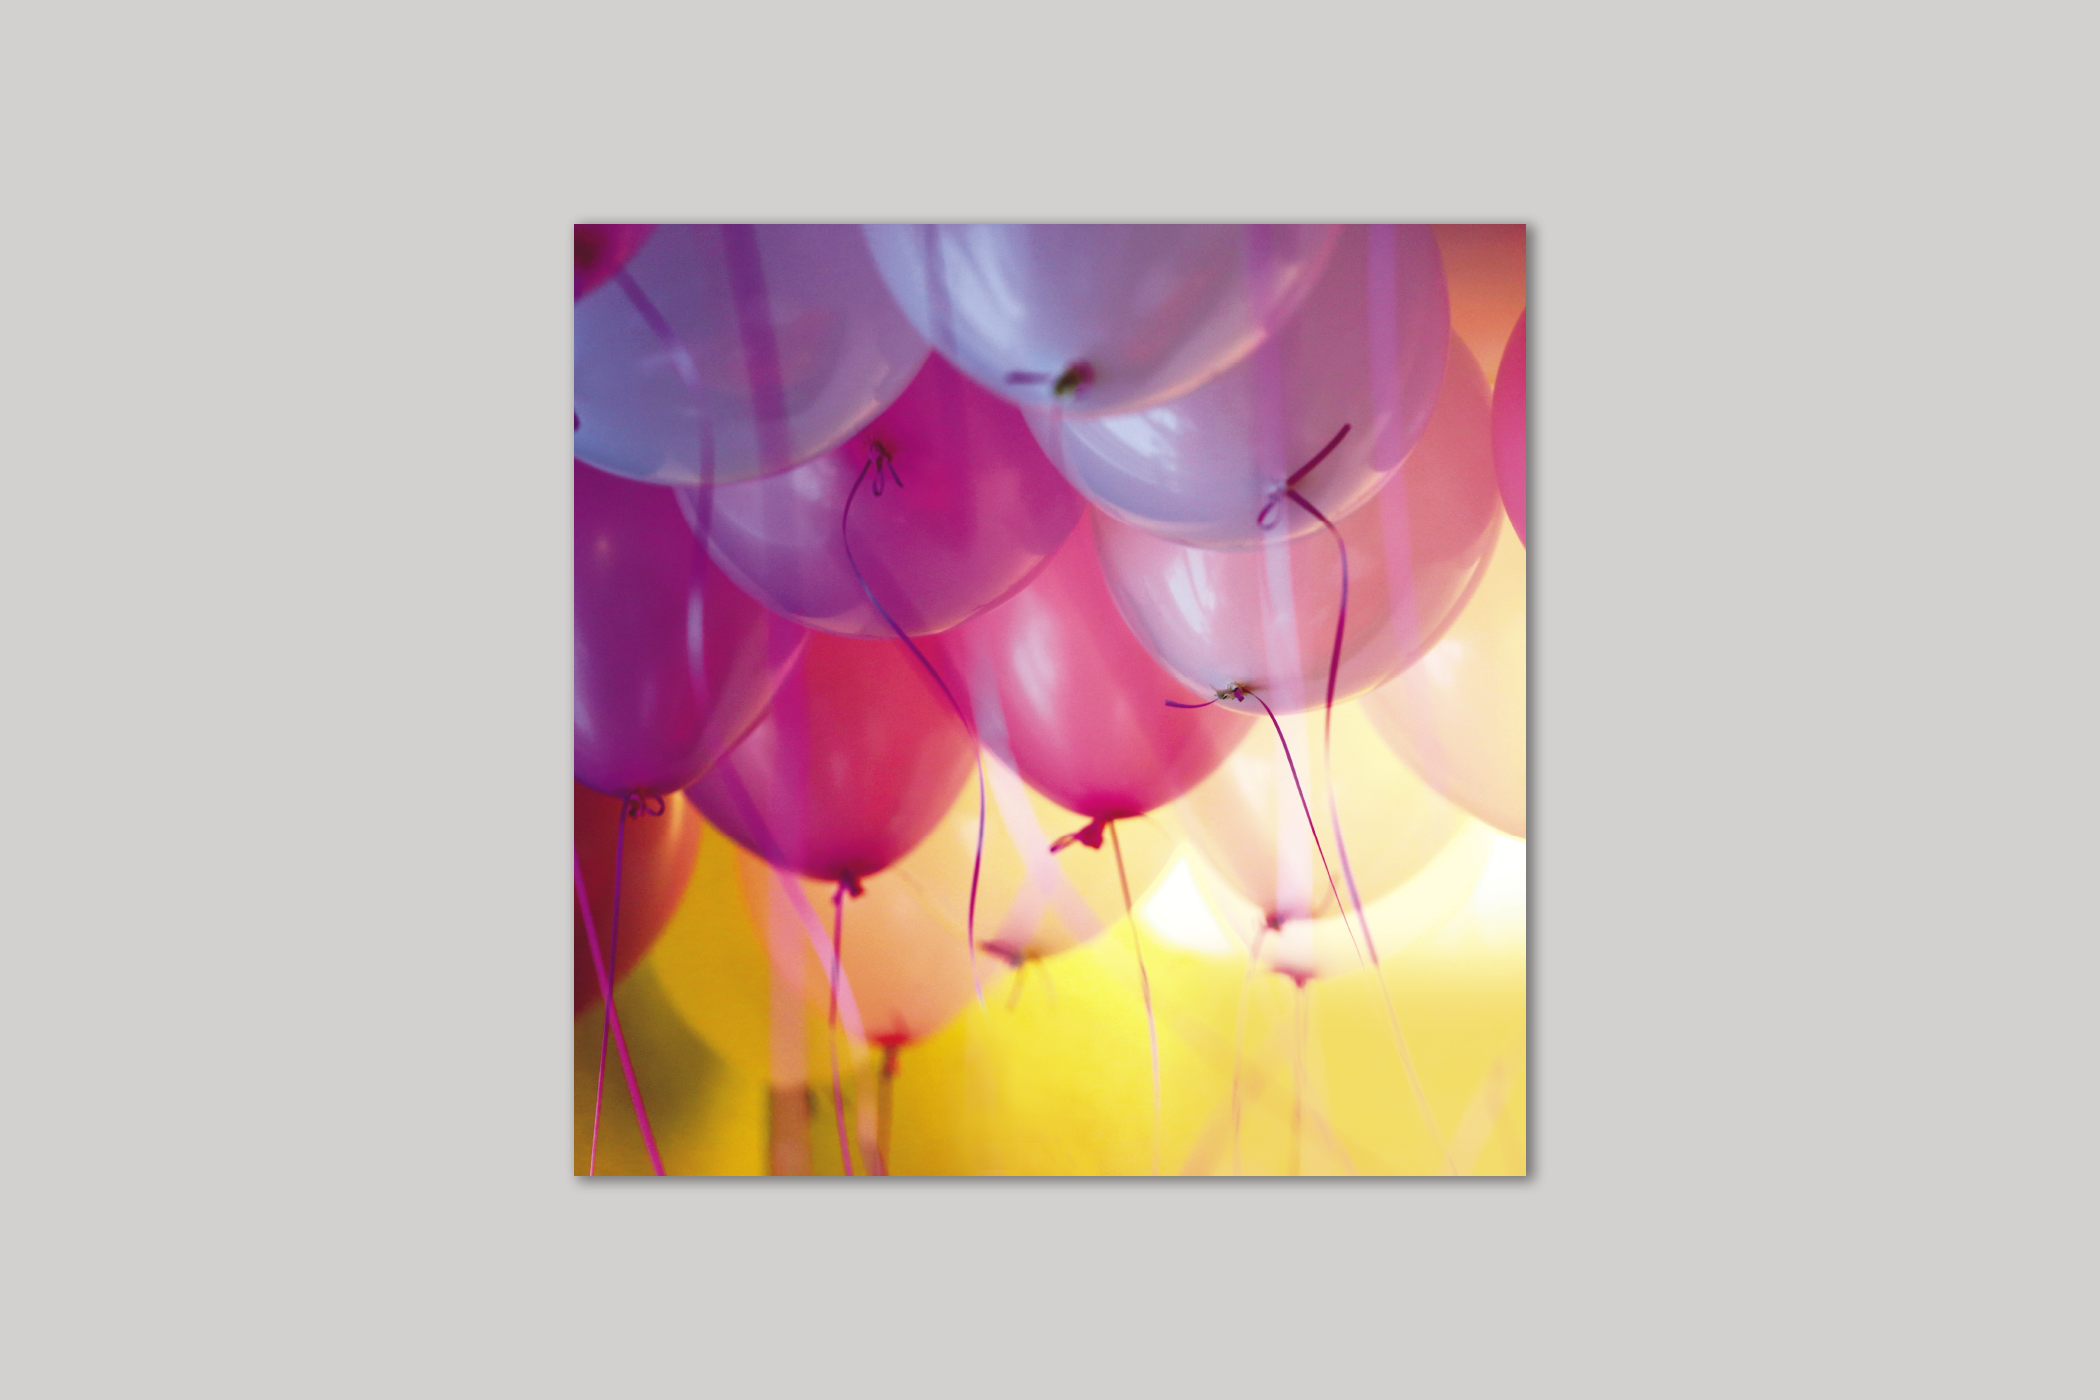 Party Balloons from Exposure range of photographic cards by Icon.